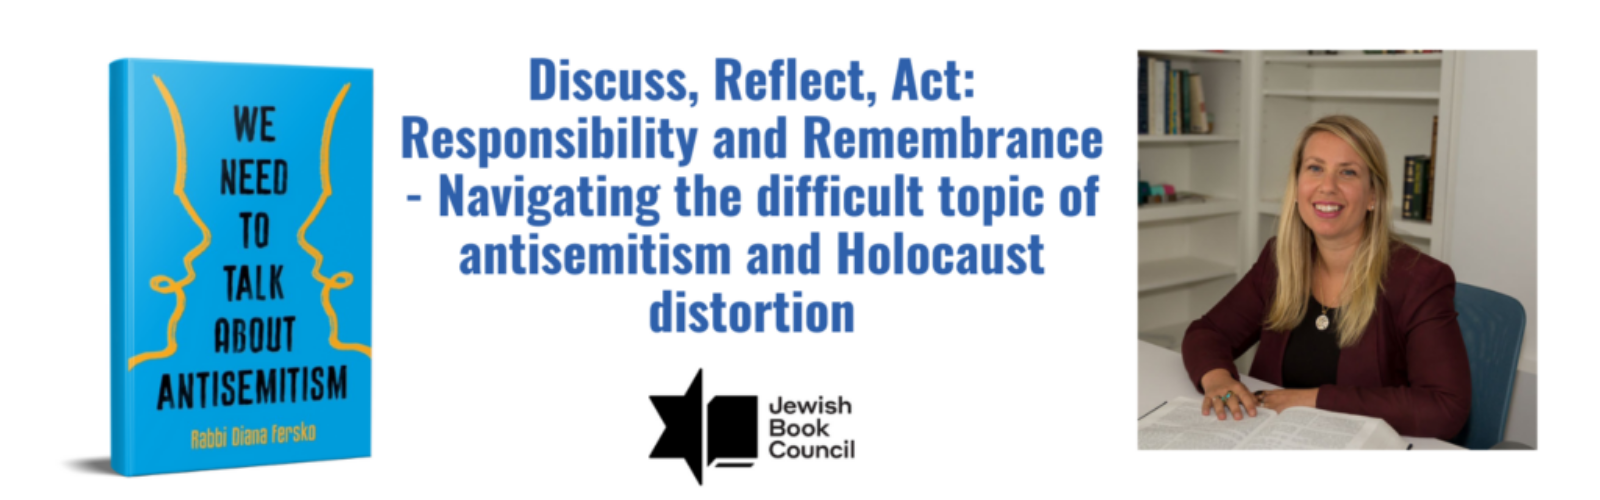 Discuss, Reflect, Act Responsibility and Remembrance - Navigating the difficult topic of antisemitism and Holocaust distortion